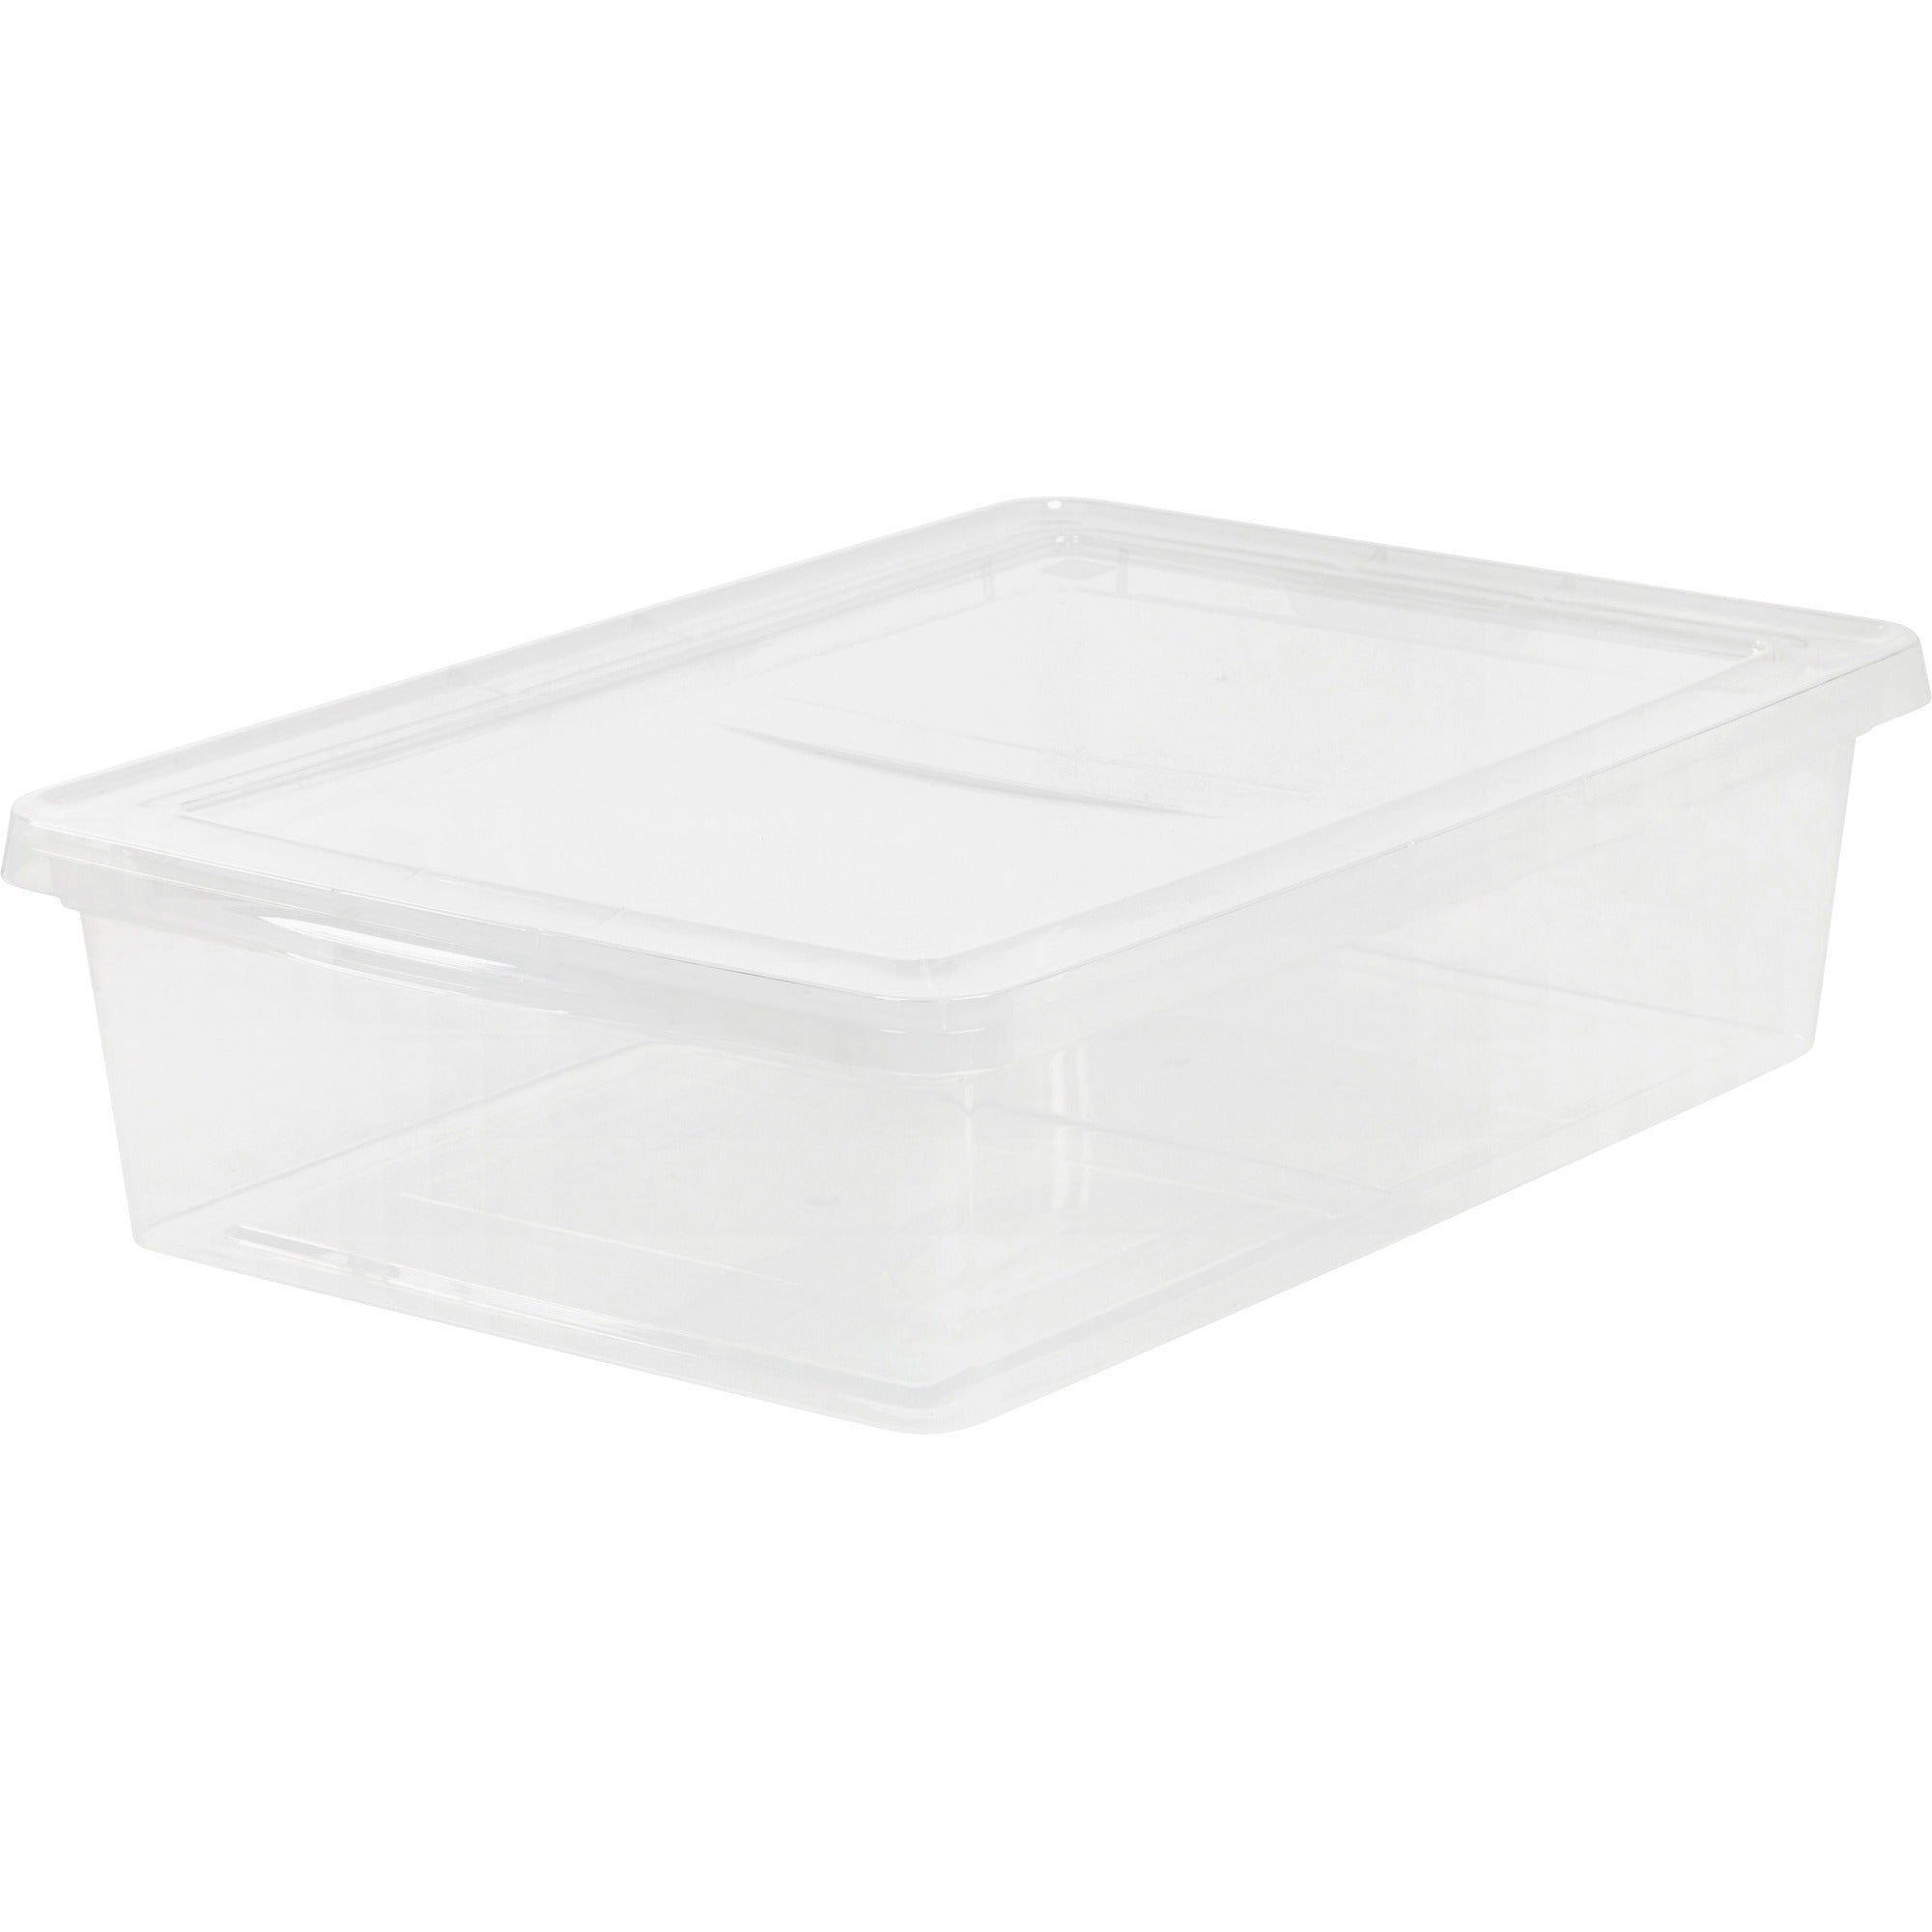 iris-28-quart-storage-box-external-dimensions-24-width-x-163-depth-x-6-height-7-gal-snap-in-lid-closure-stackable-plastic-clear-for-clothes-shoes-1-each_irs200420 - 1